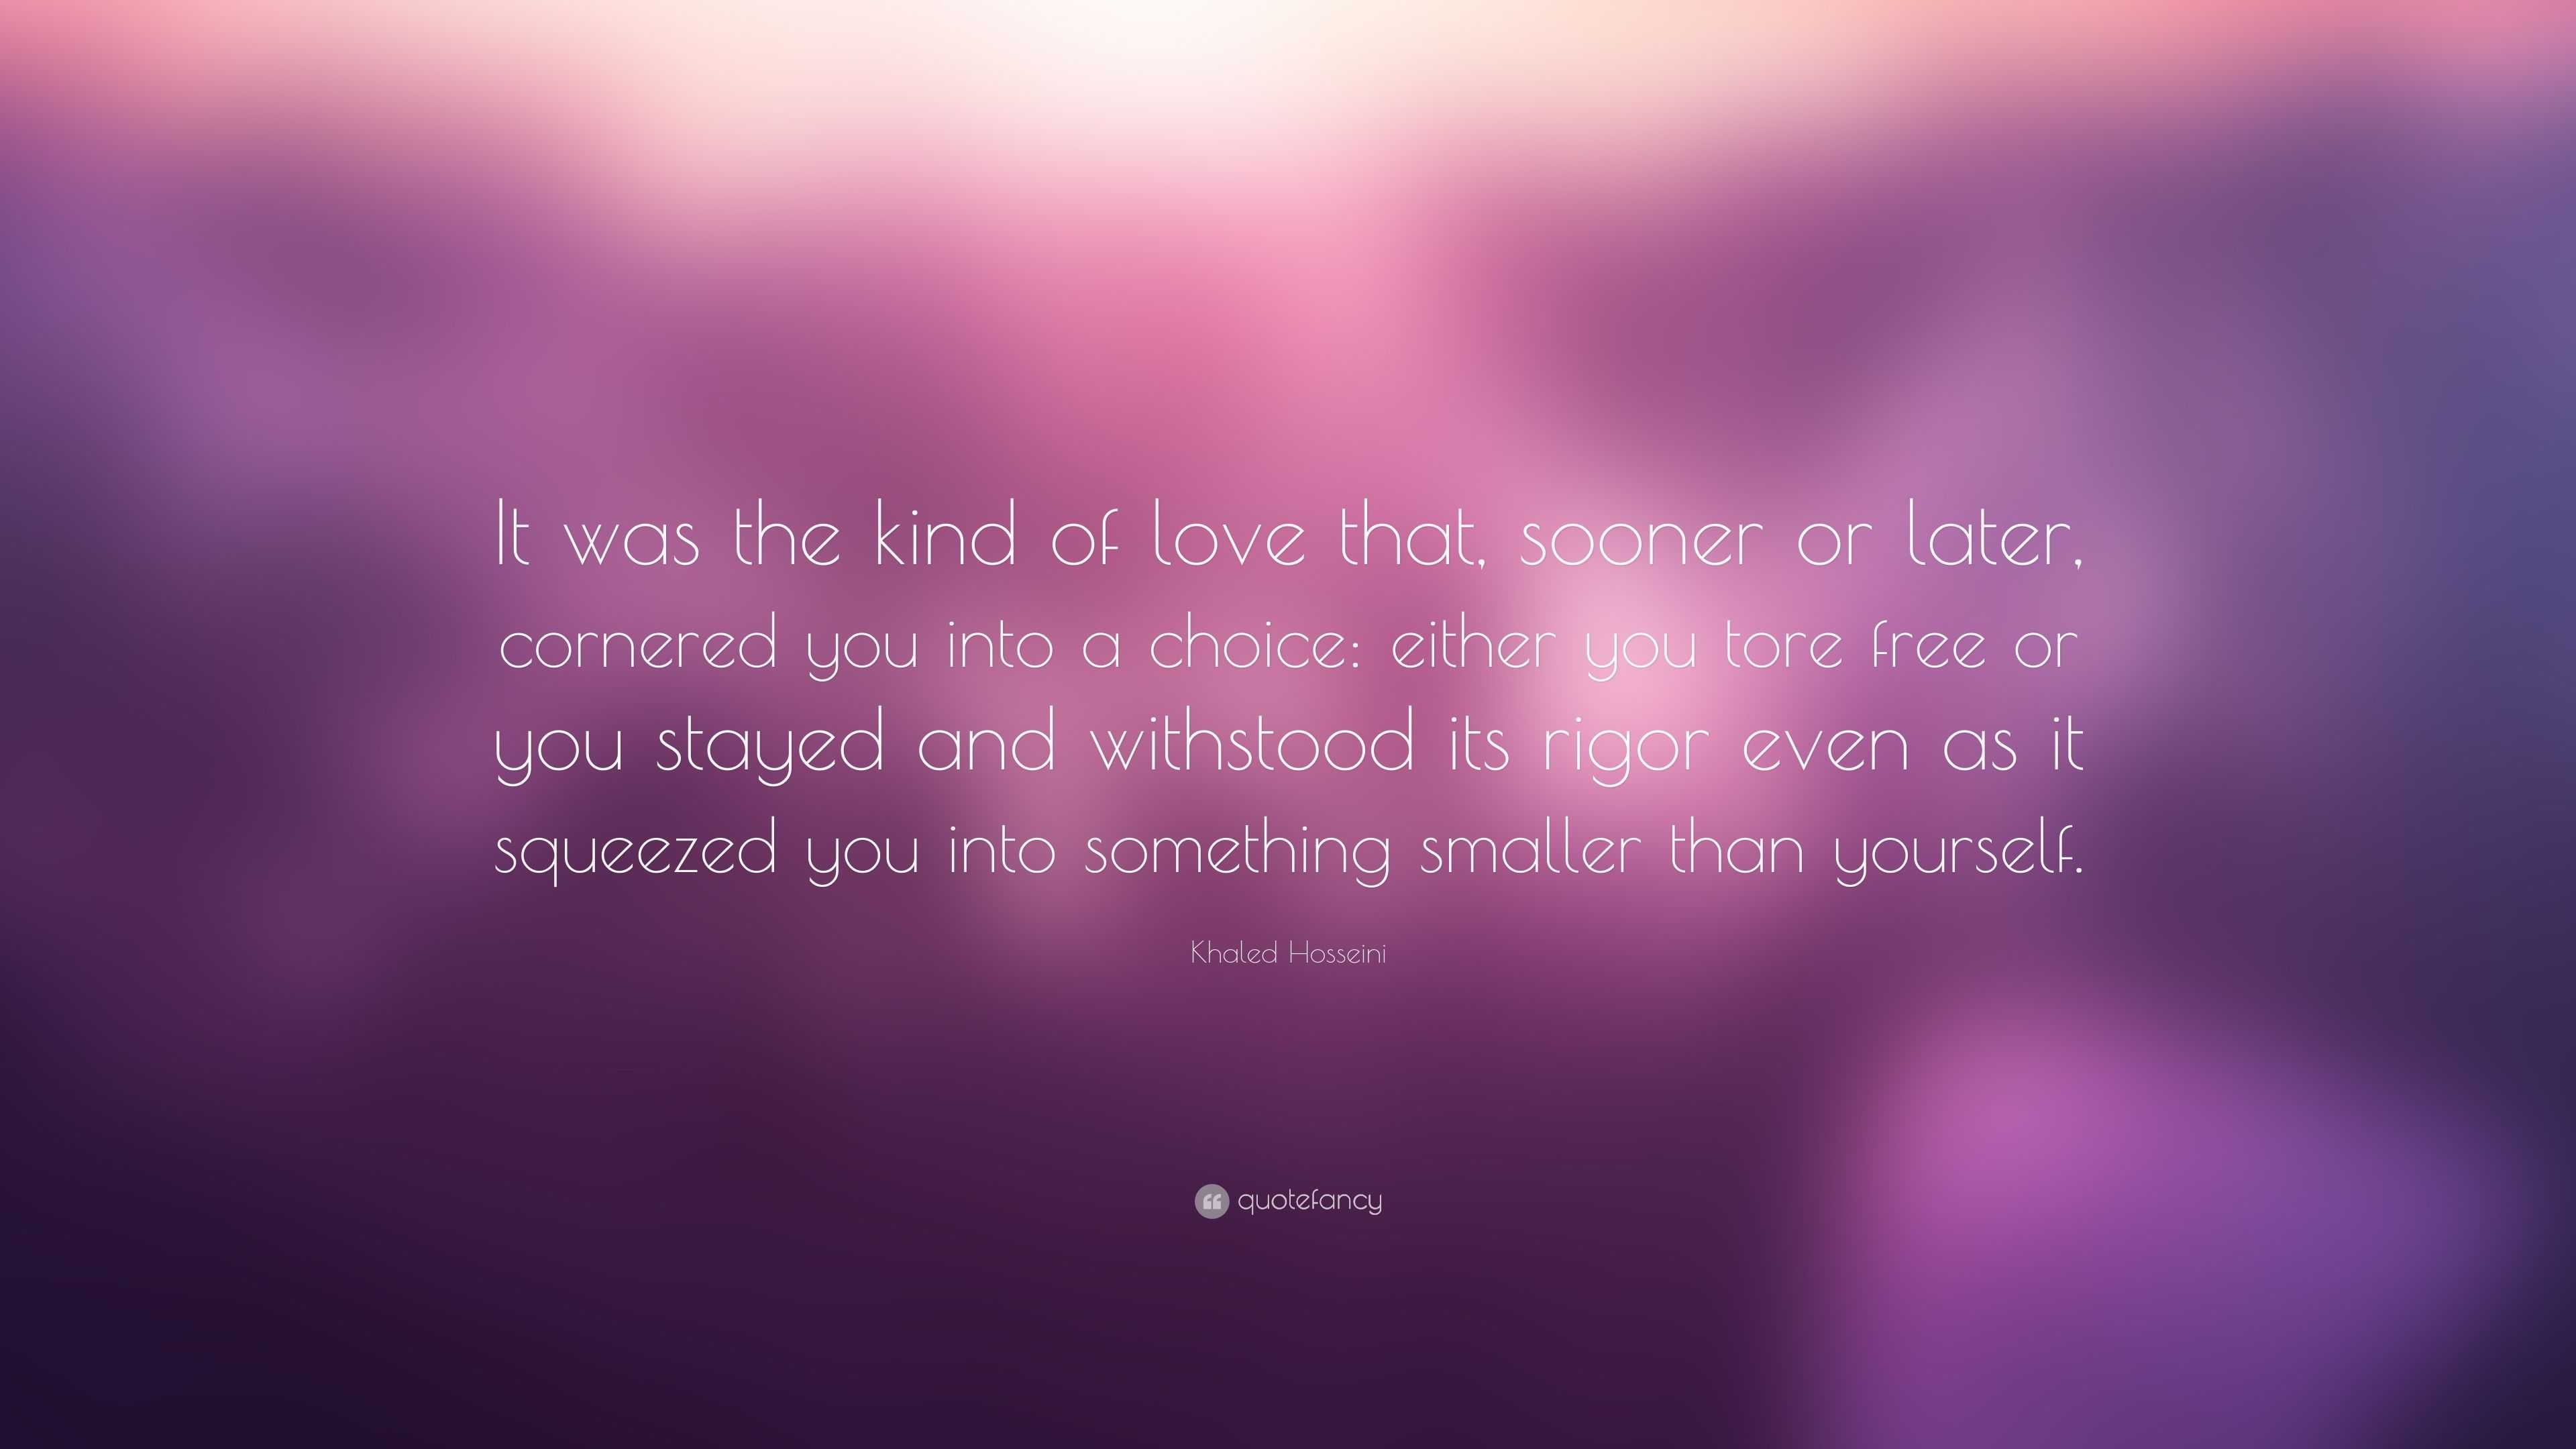 Khaled Hosseini Quote: “It was the kind of love that, sooner or later ...